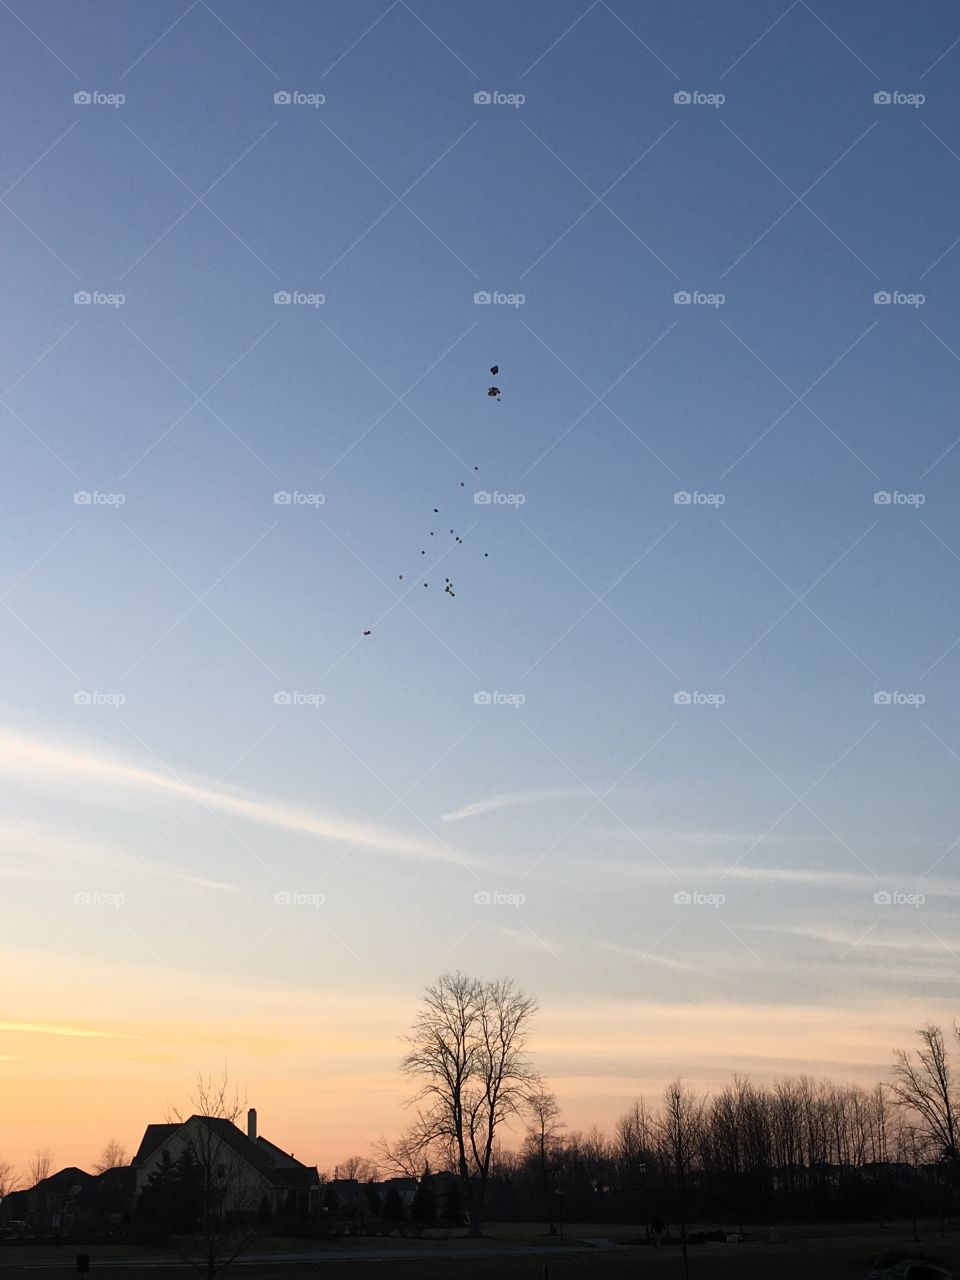 Balloons floating in the sky.